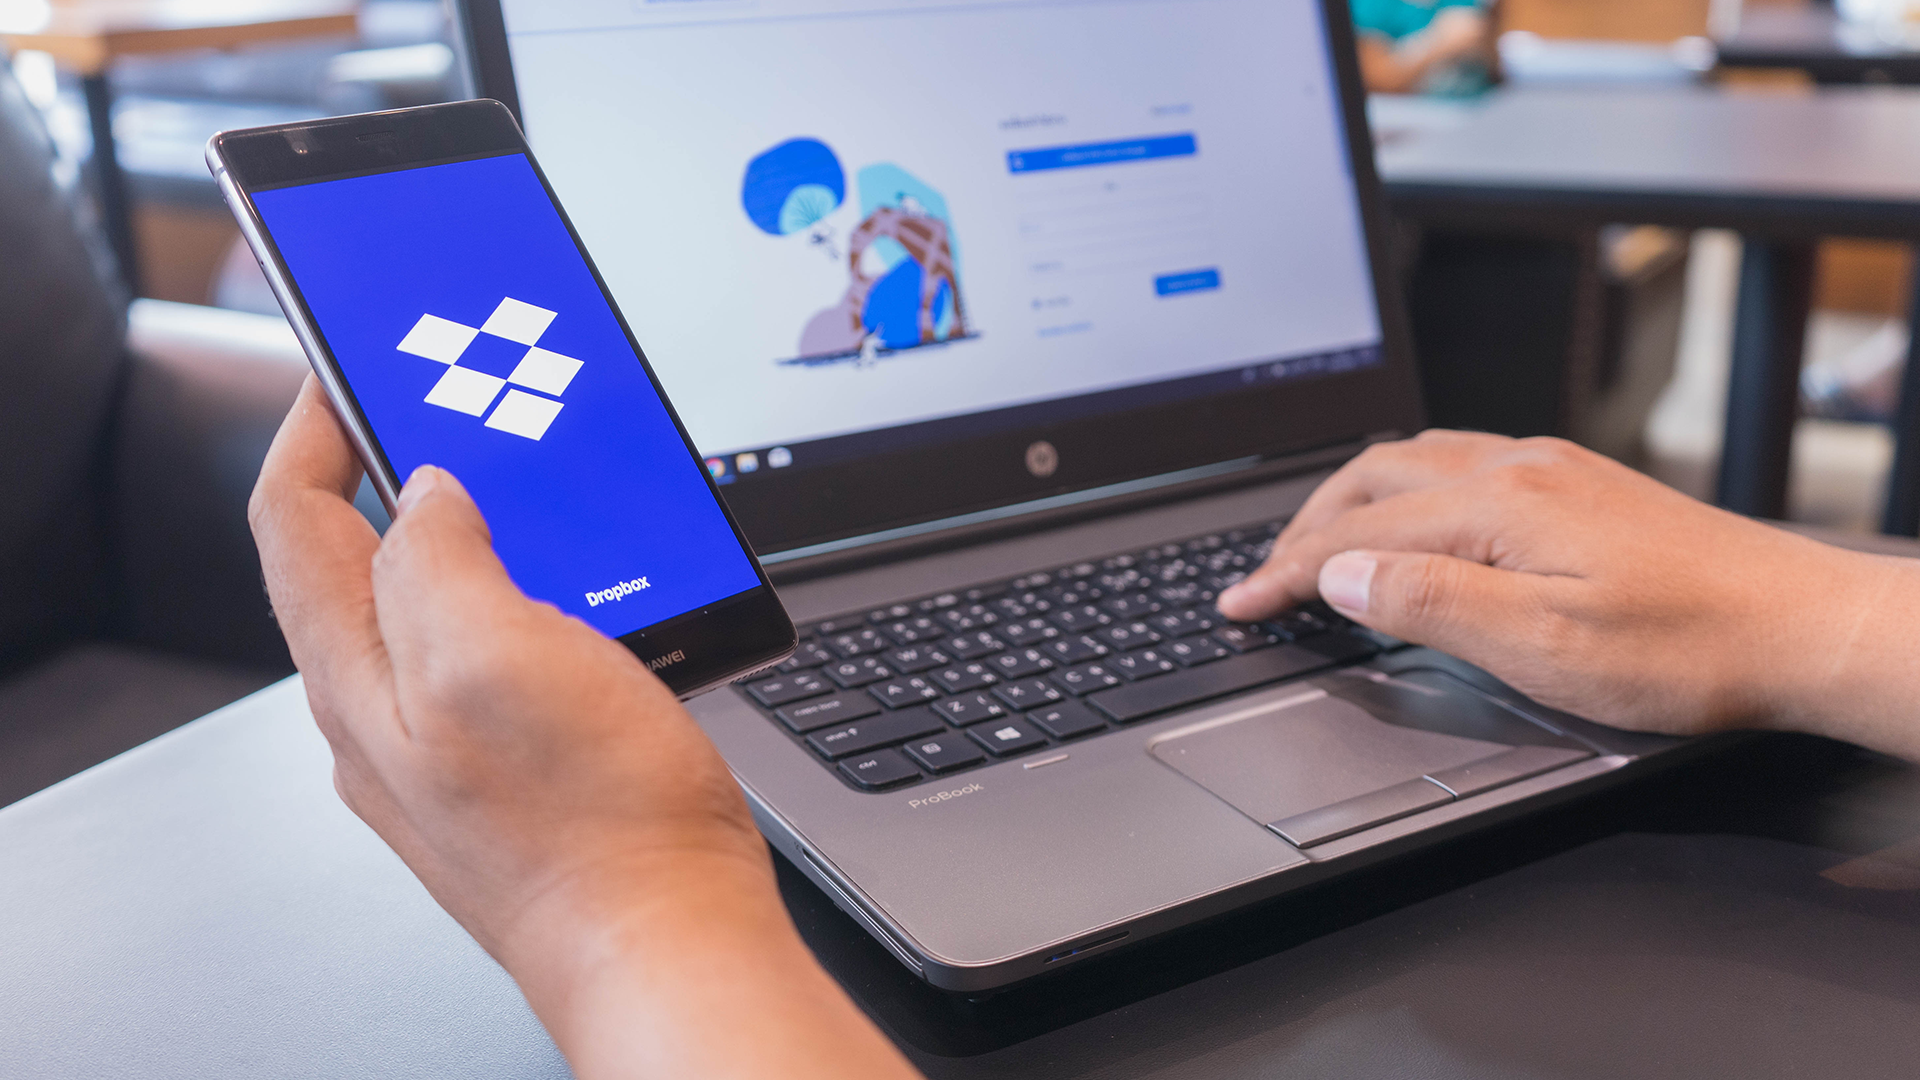 A person using Dropbox on their phone and computer.